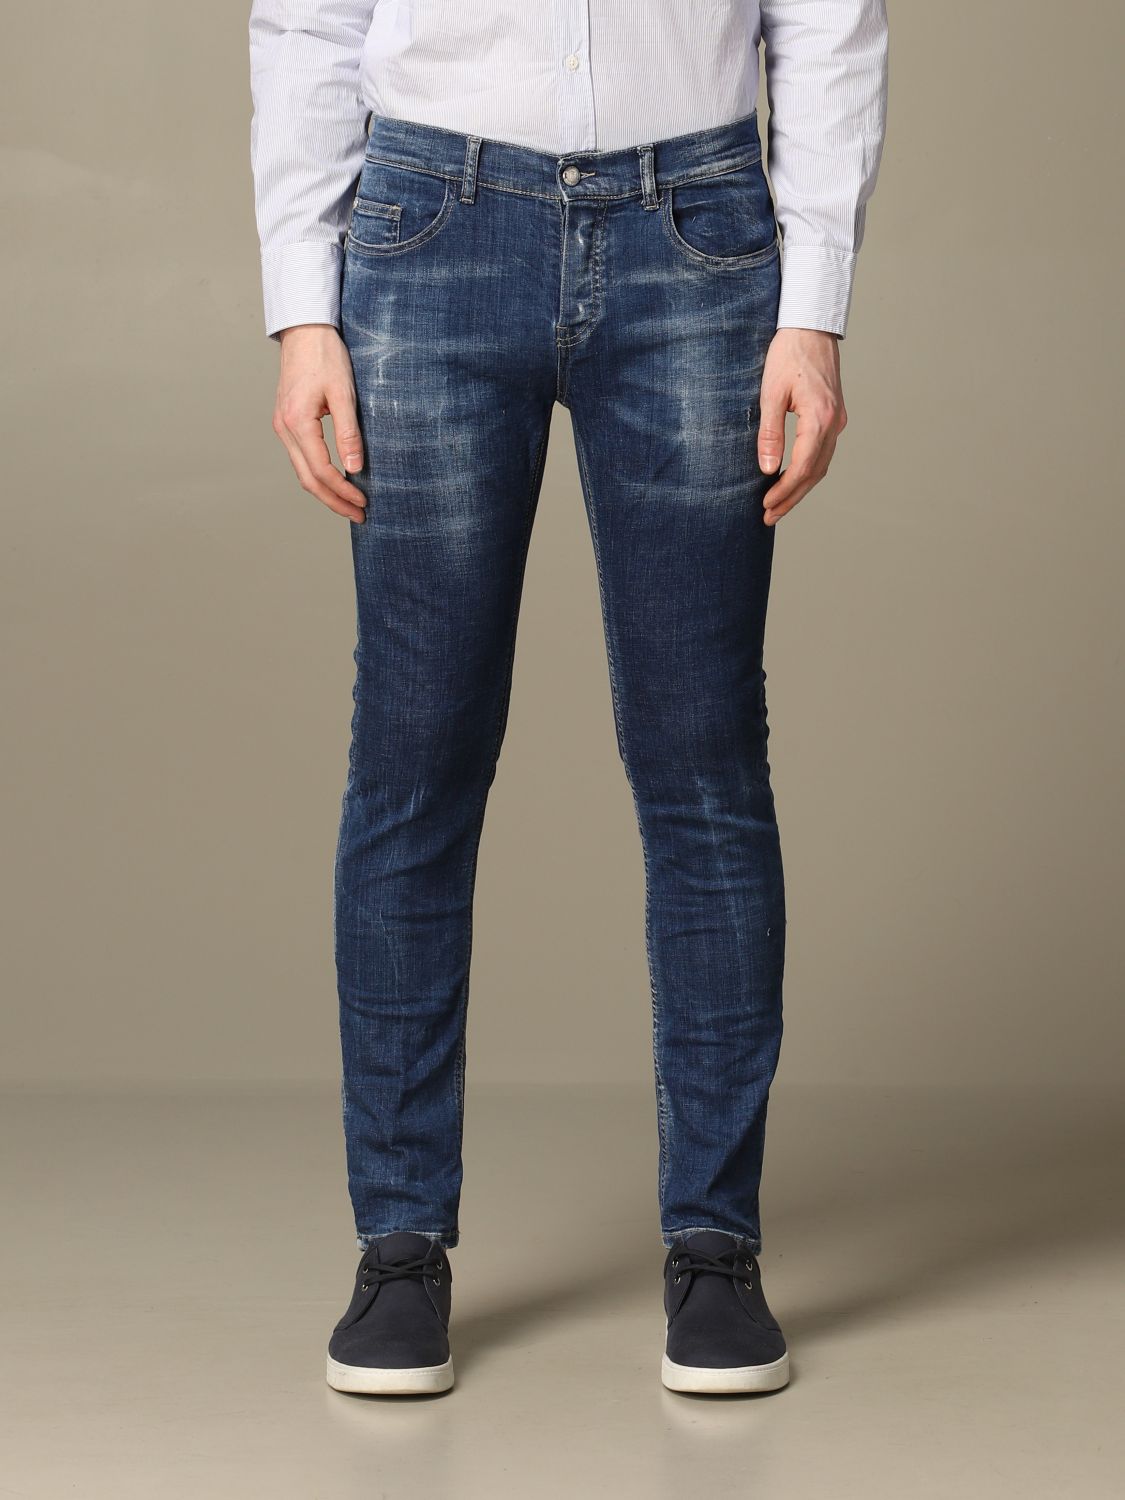 Morello Outlet: fit with tears - | Frankie Morello jeans FMS0005JE 1000 online at GIGLIO.COM